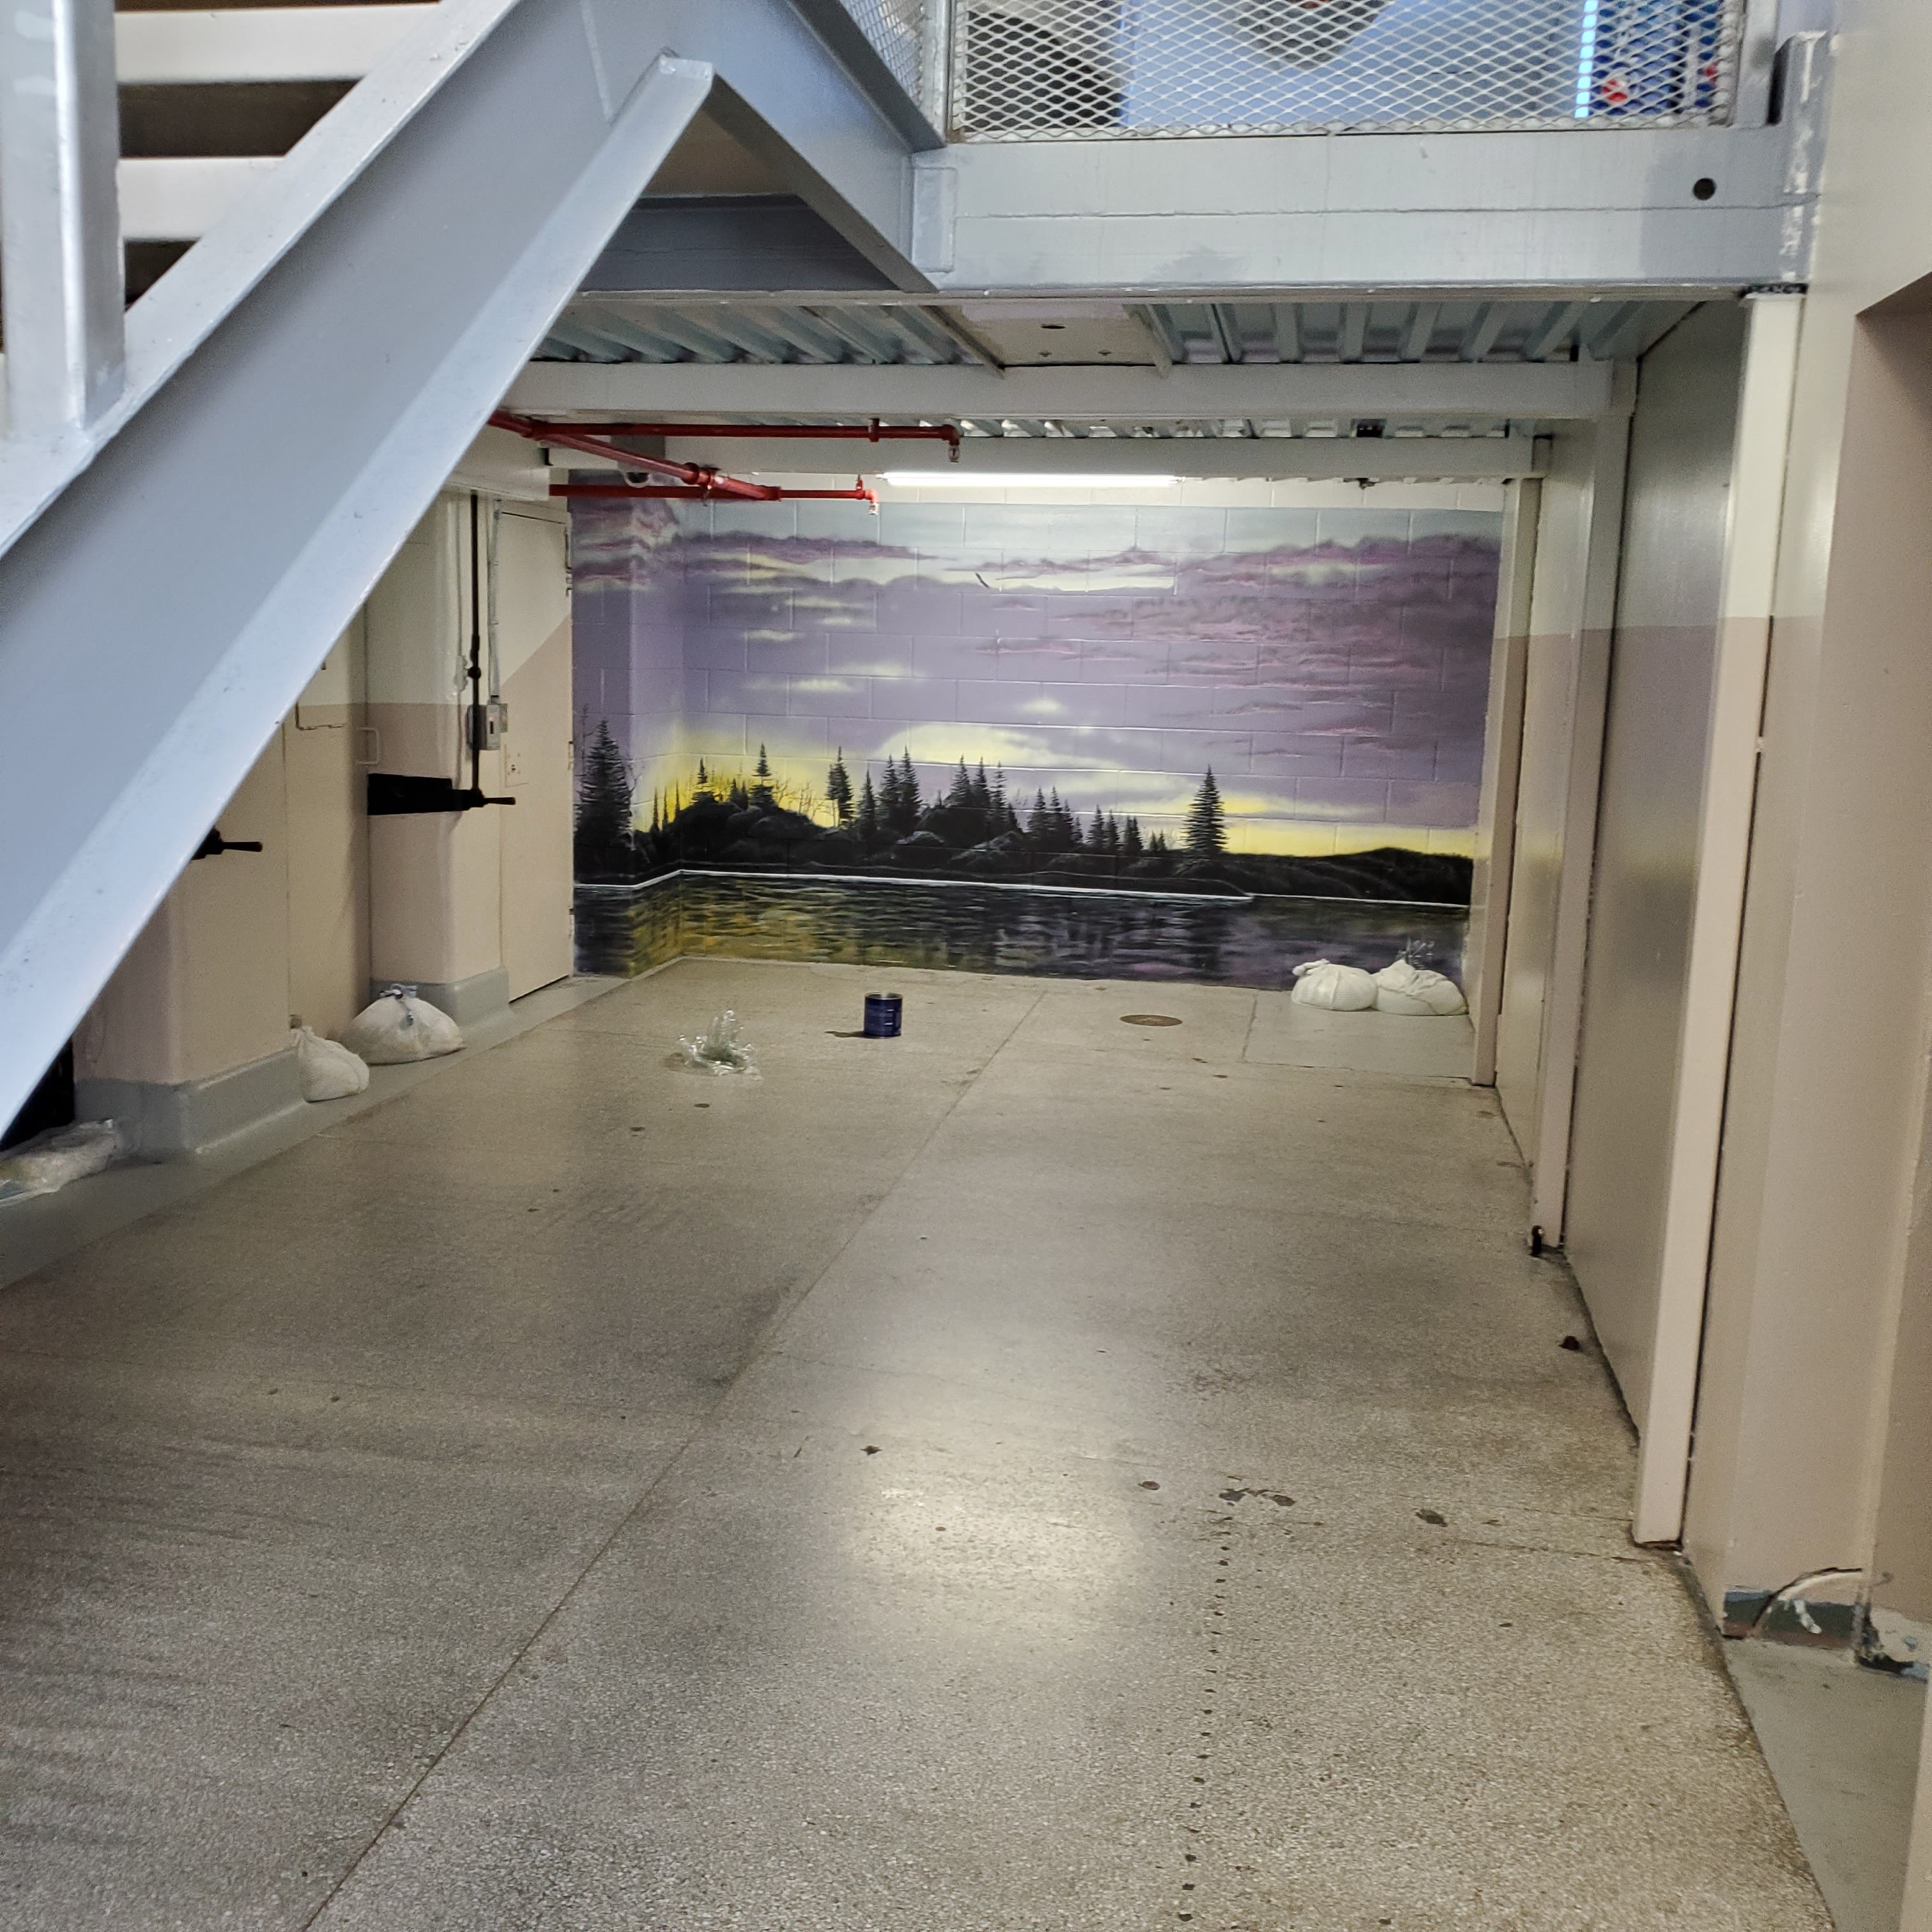 Photo of a location at the end of the Pathways unit where smudging ceremonies are sometimes held at Saskatchewan Penitentiary.